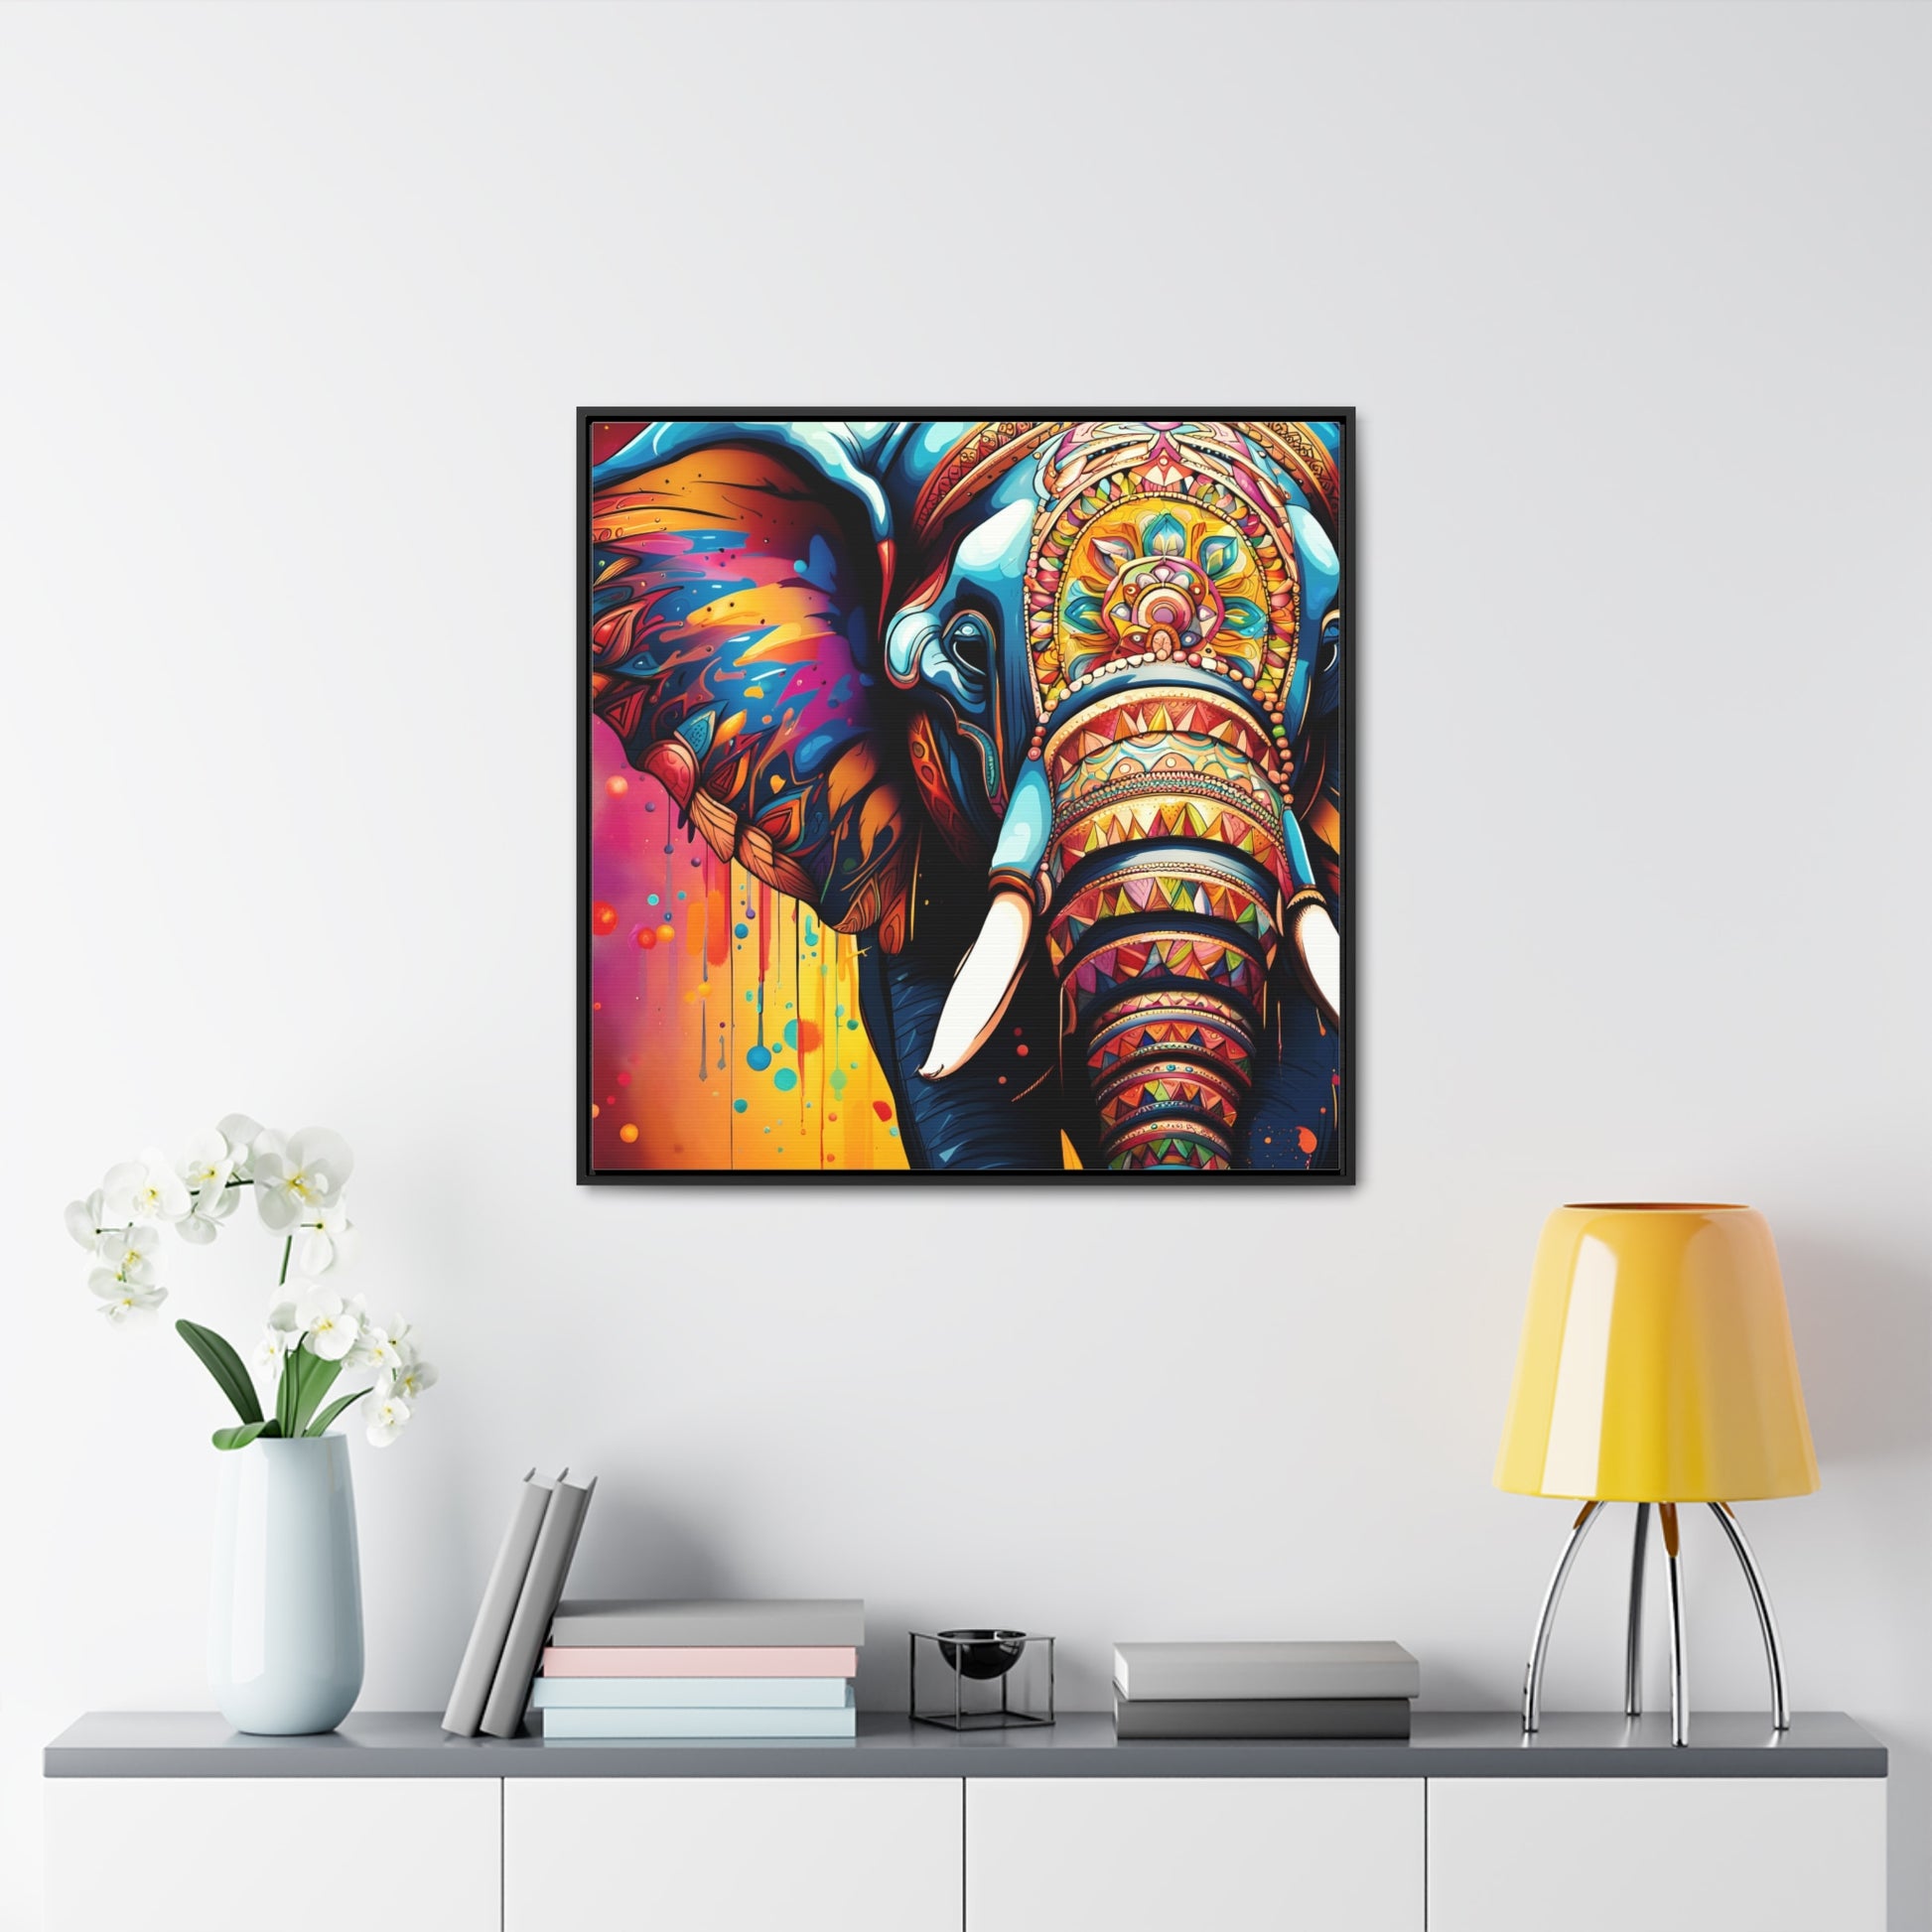 Stunning Multicolor Elephant Head Print on Canvas in a Floating Frame 30x30 hung on light wall